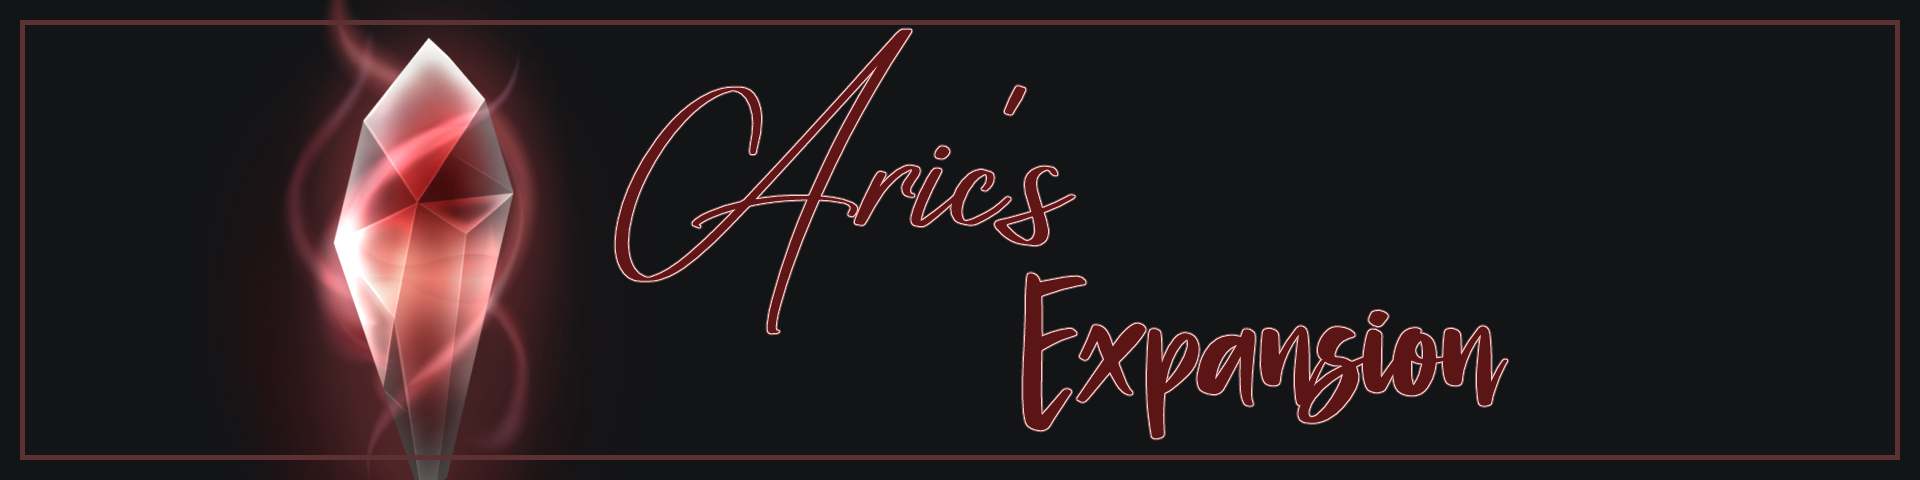 Strive for Power - Aric's Expansion